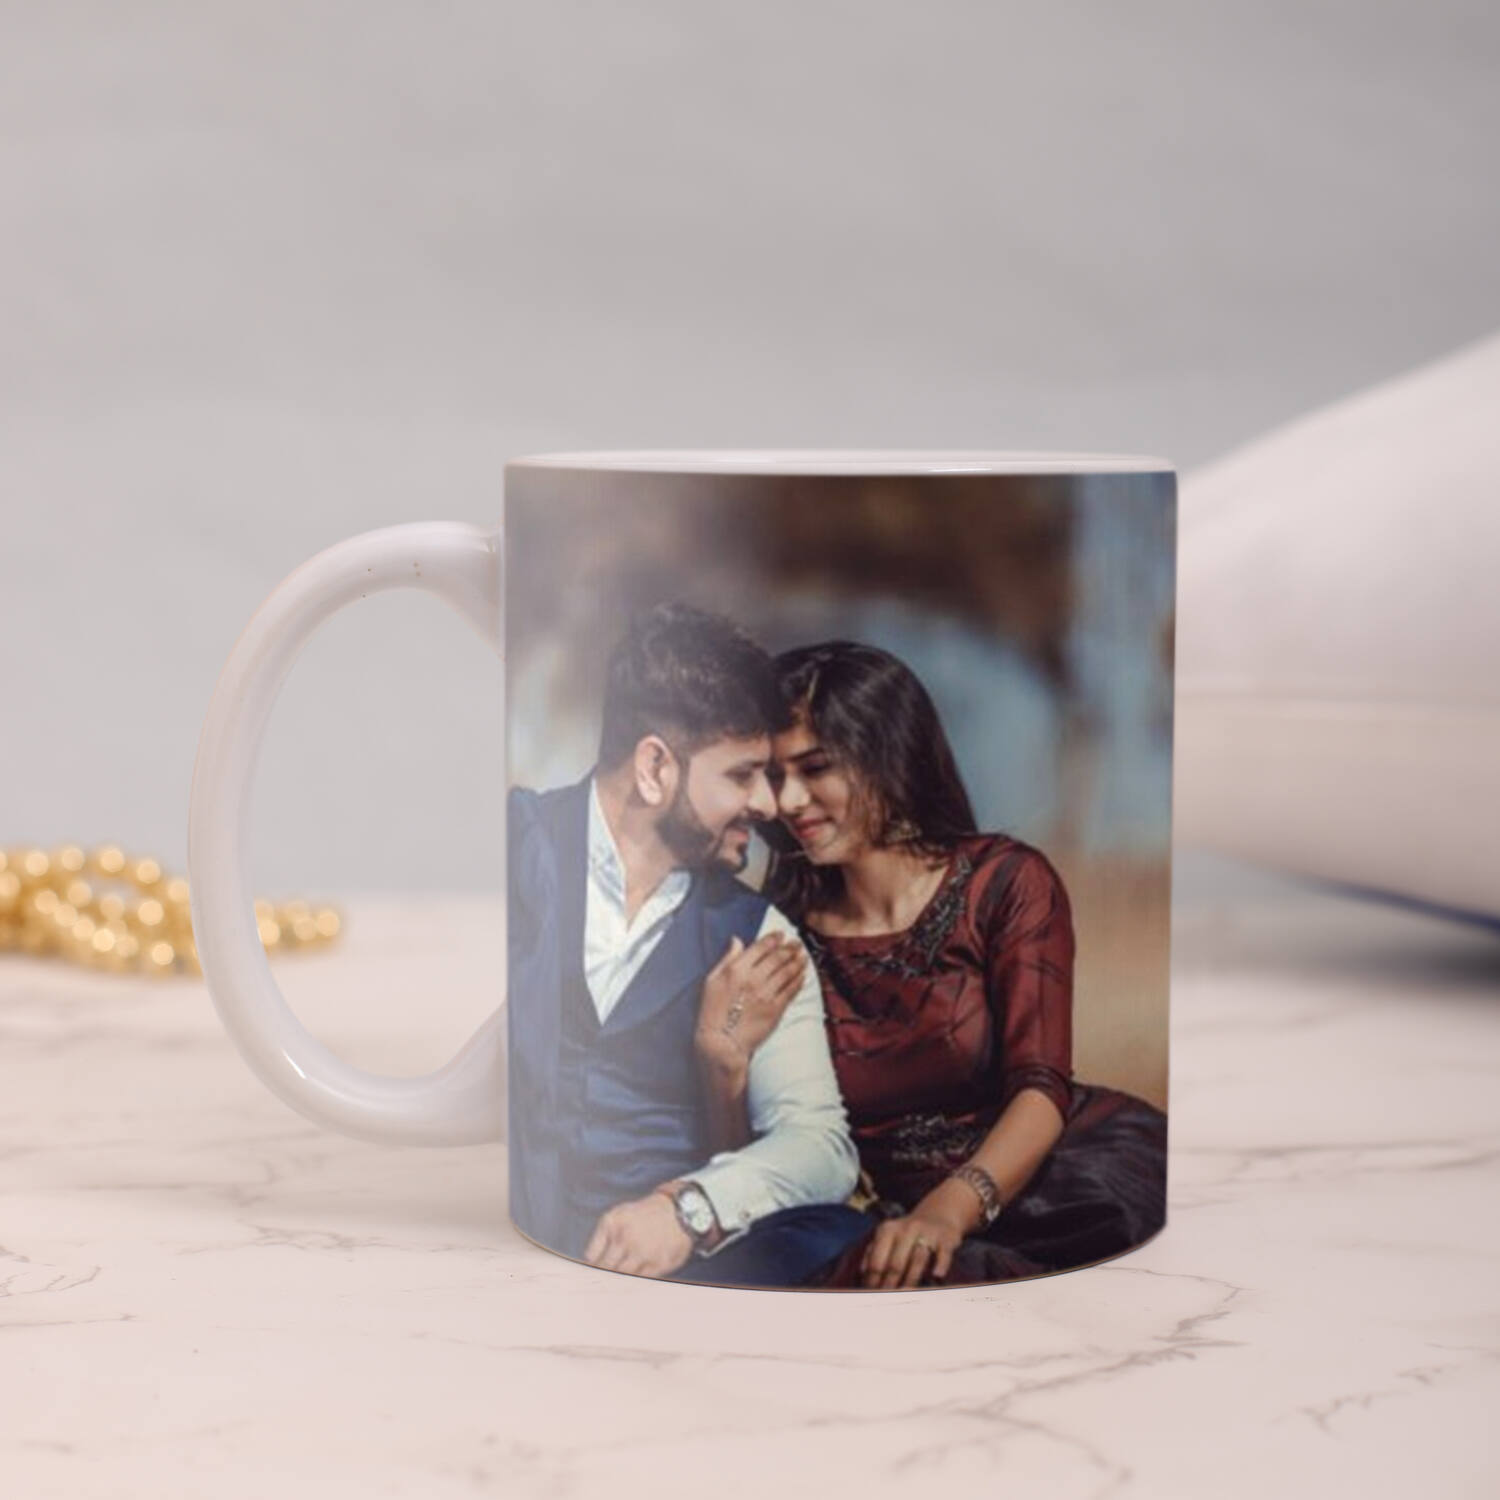 Buy Husband Gift Ideas Gift for Birthday Husband Anniversary Online in  India  Etsy